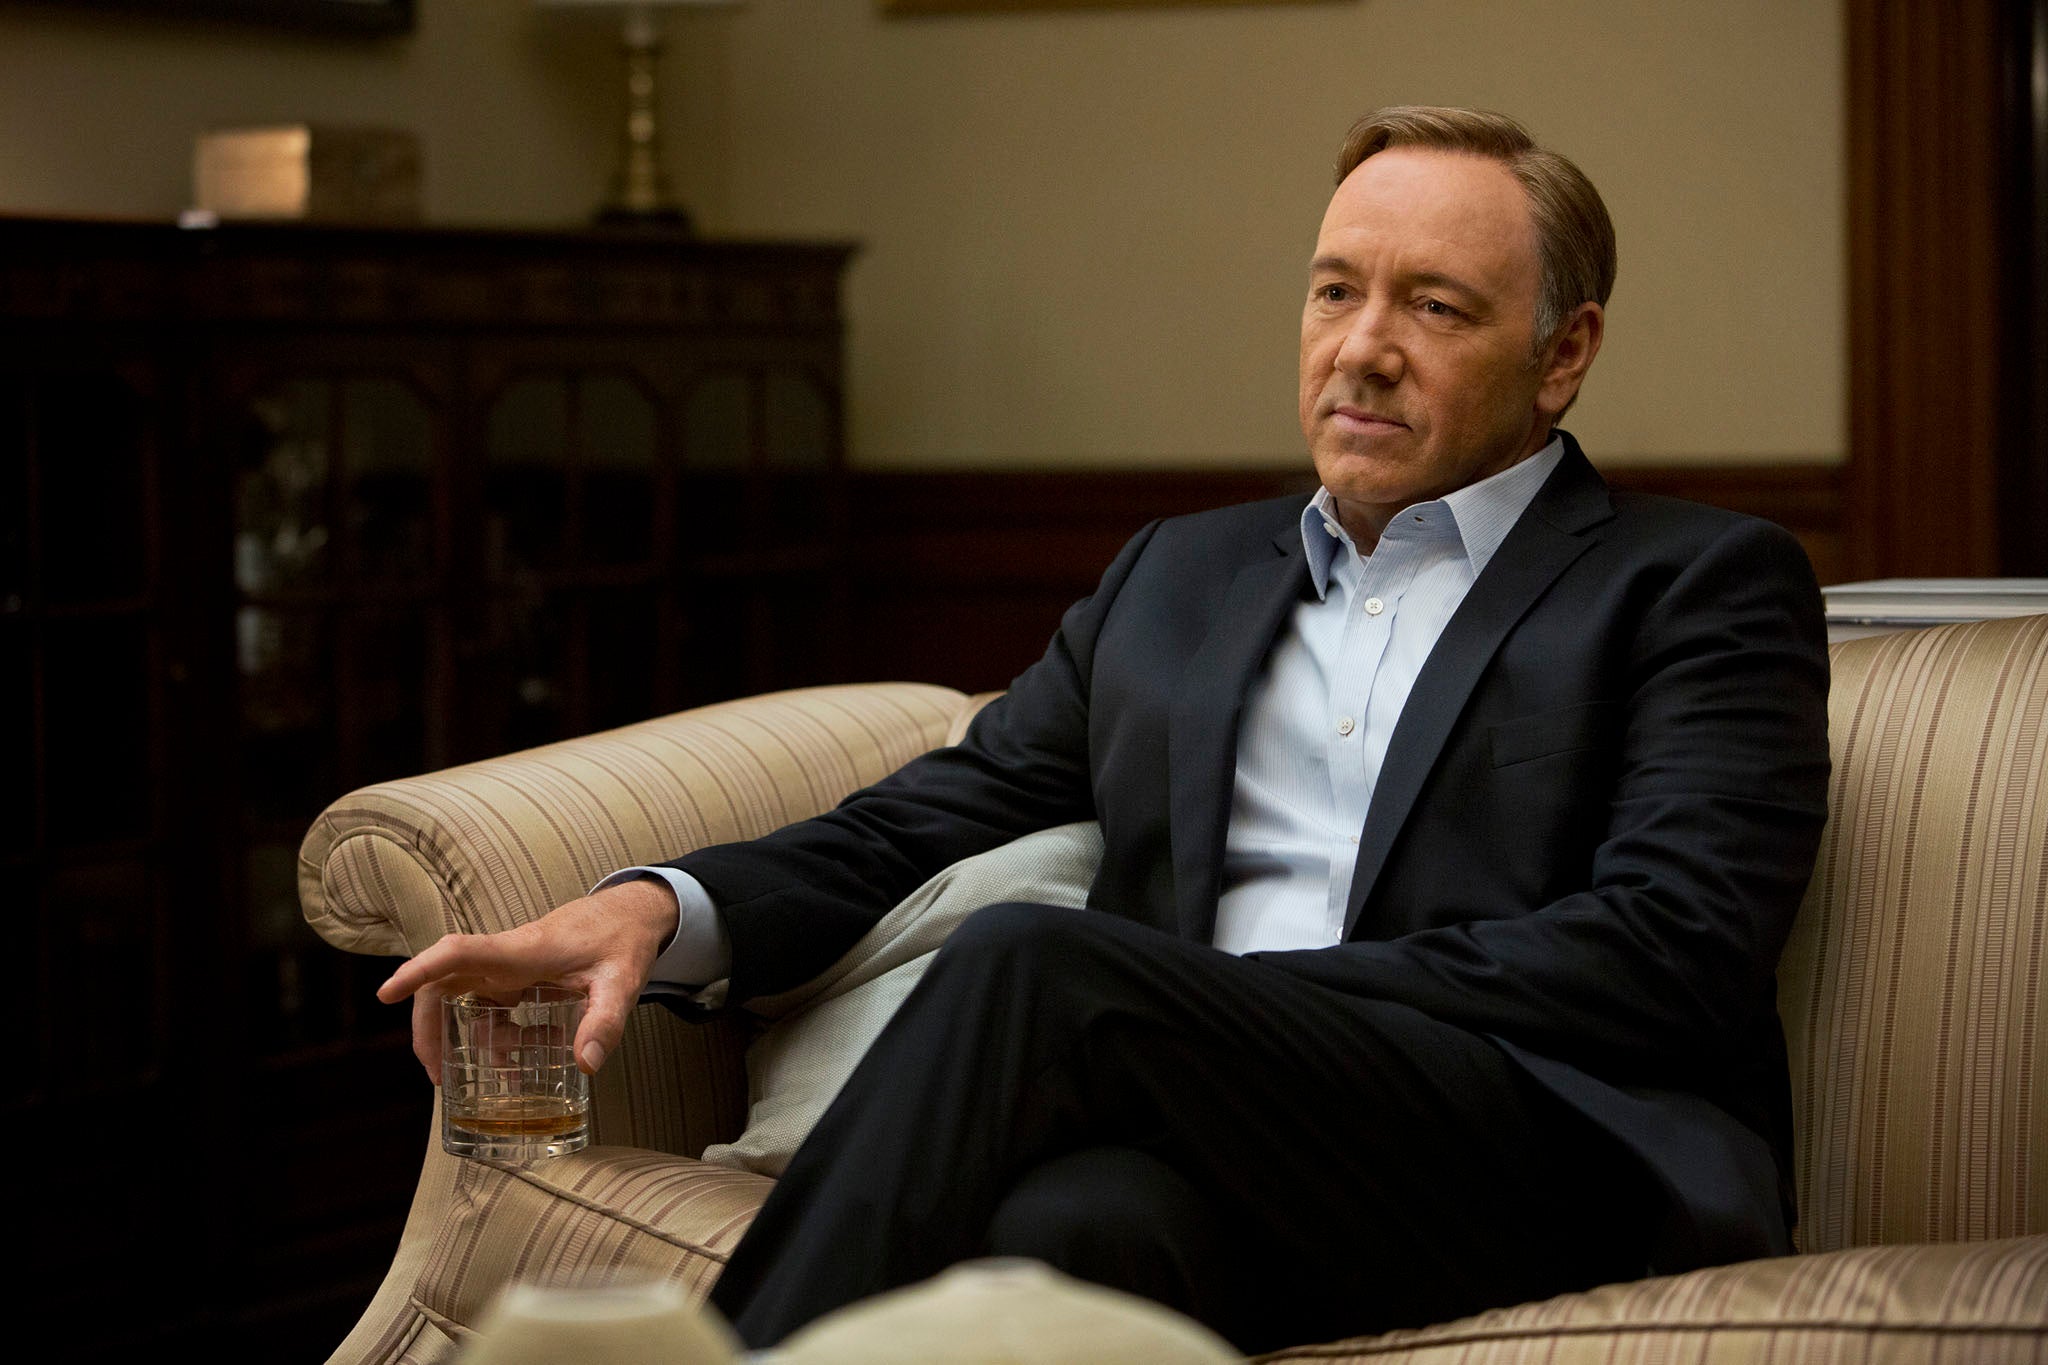 Kevin Spacey in a scene from 'House of Cards'. The 13-episode series was made available on Netflix earlier this year.